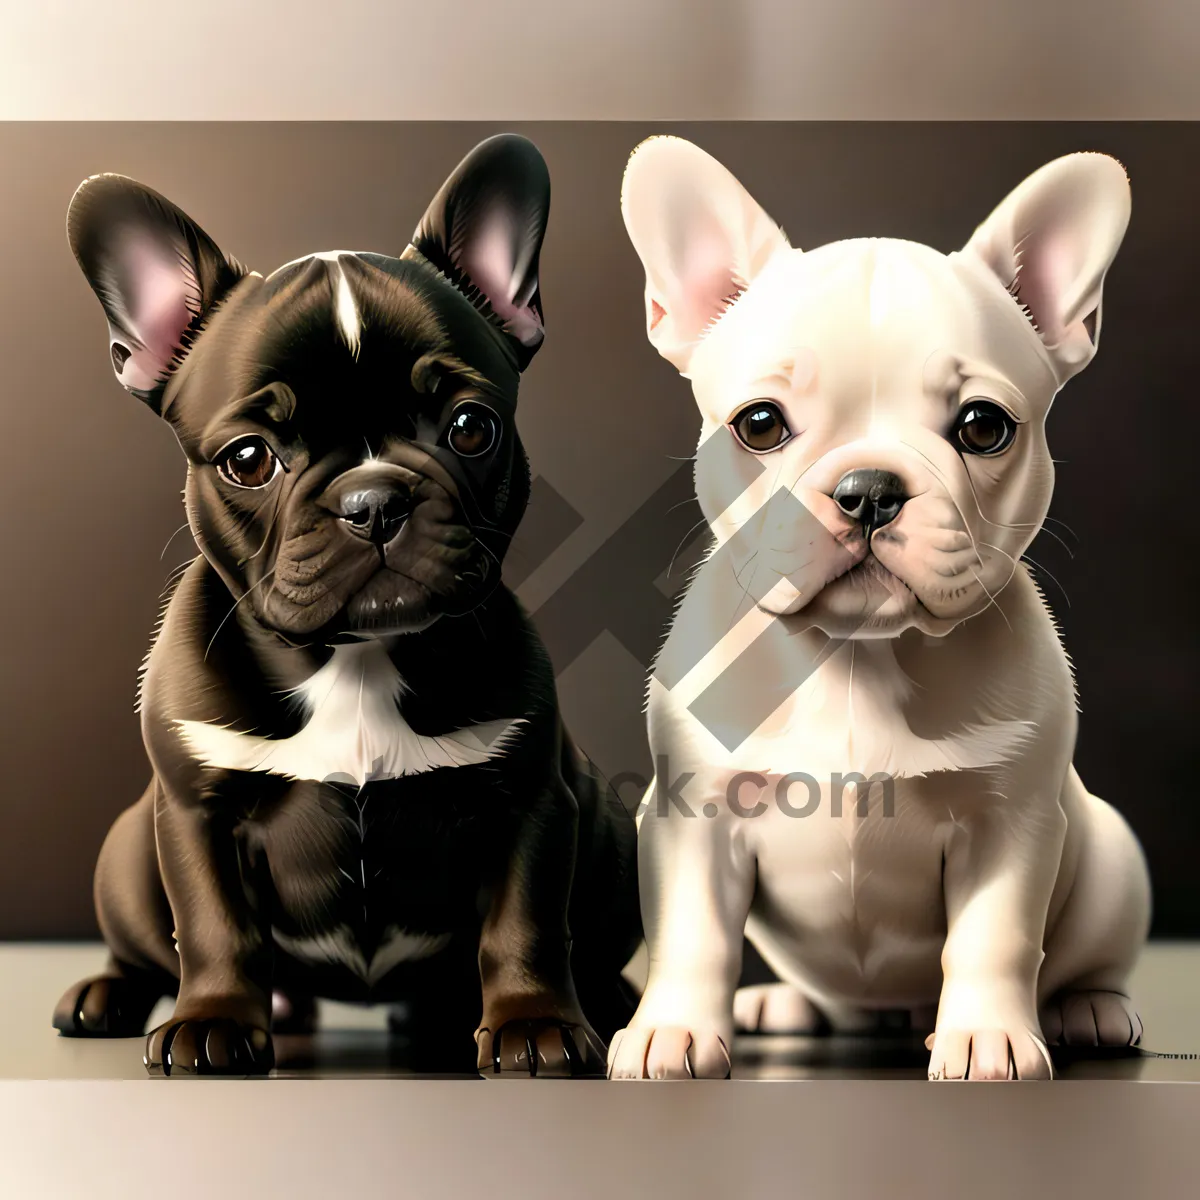 Picture of Adorable Bulldog Puppy with Wrinkles - Purebred Canine Studio Portrait